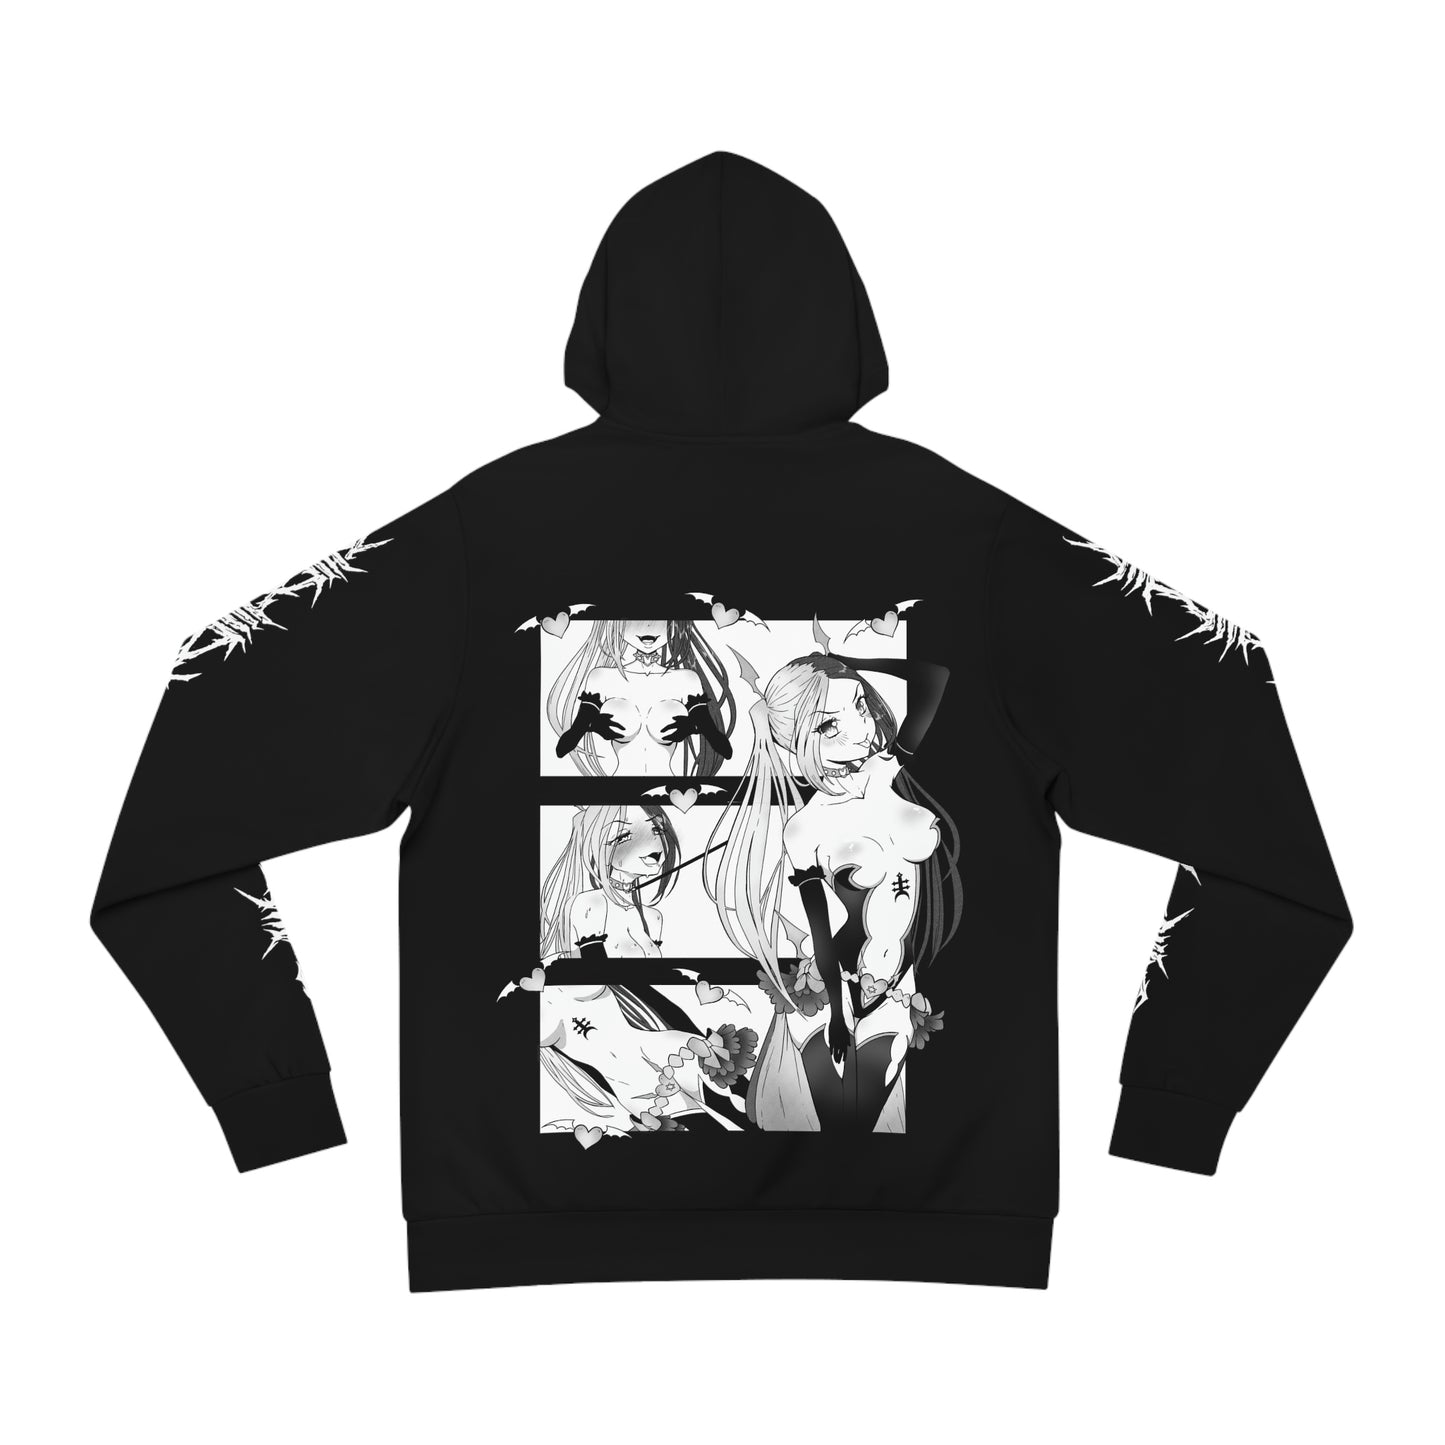 Daddy's Disappointment Hiku  Hoodie (LIMITED TO 10)